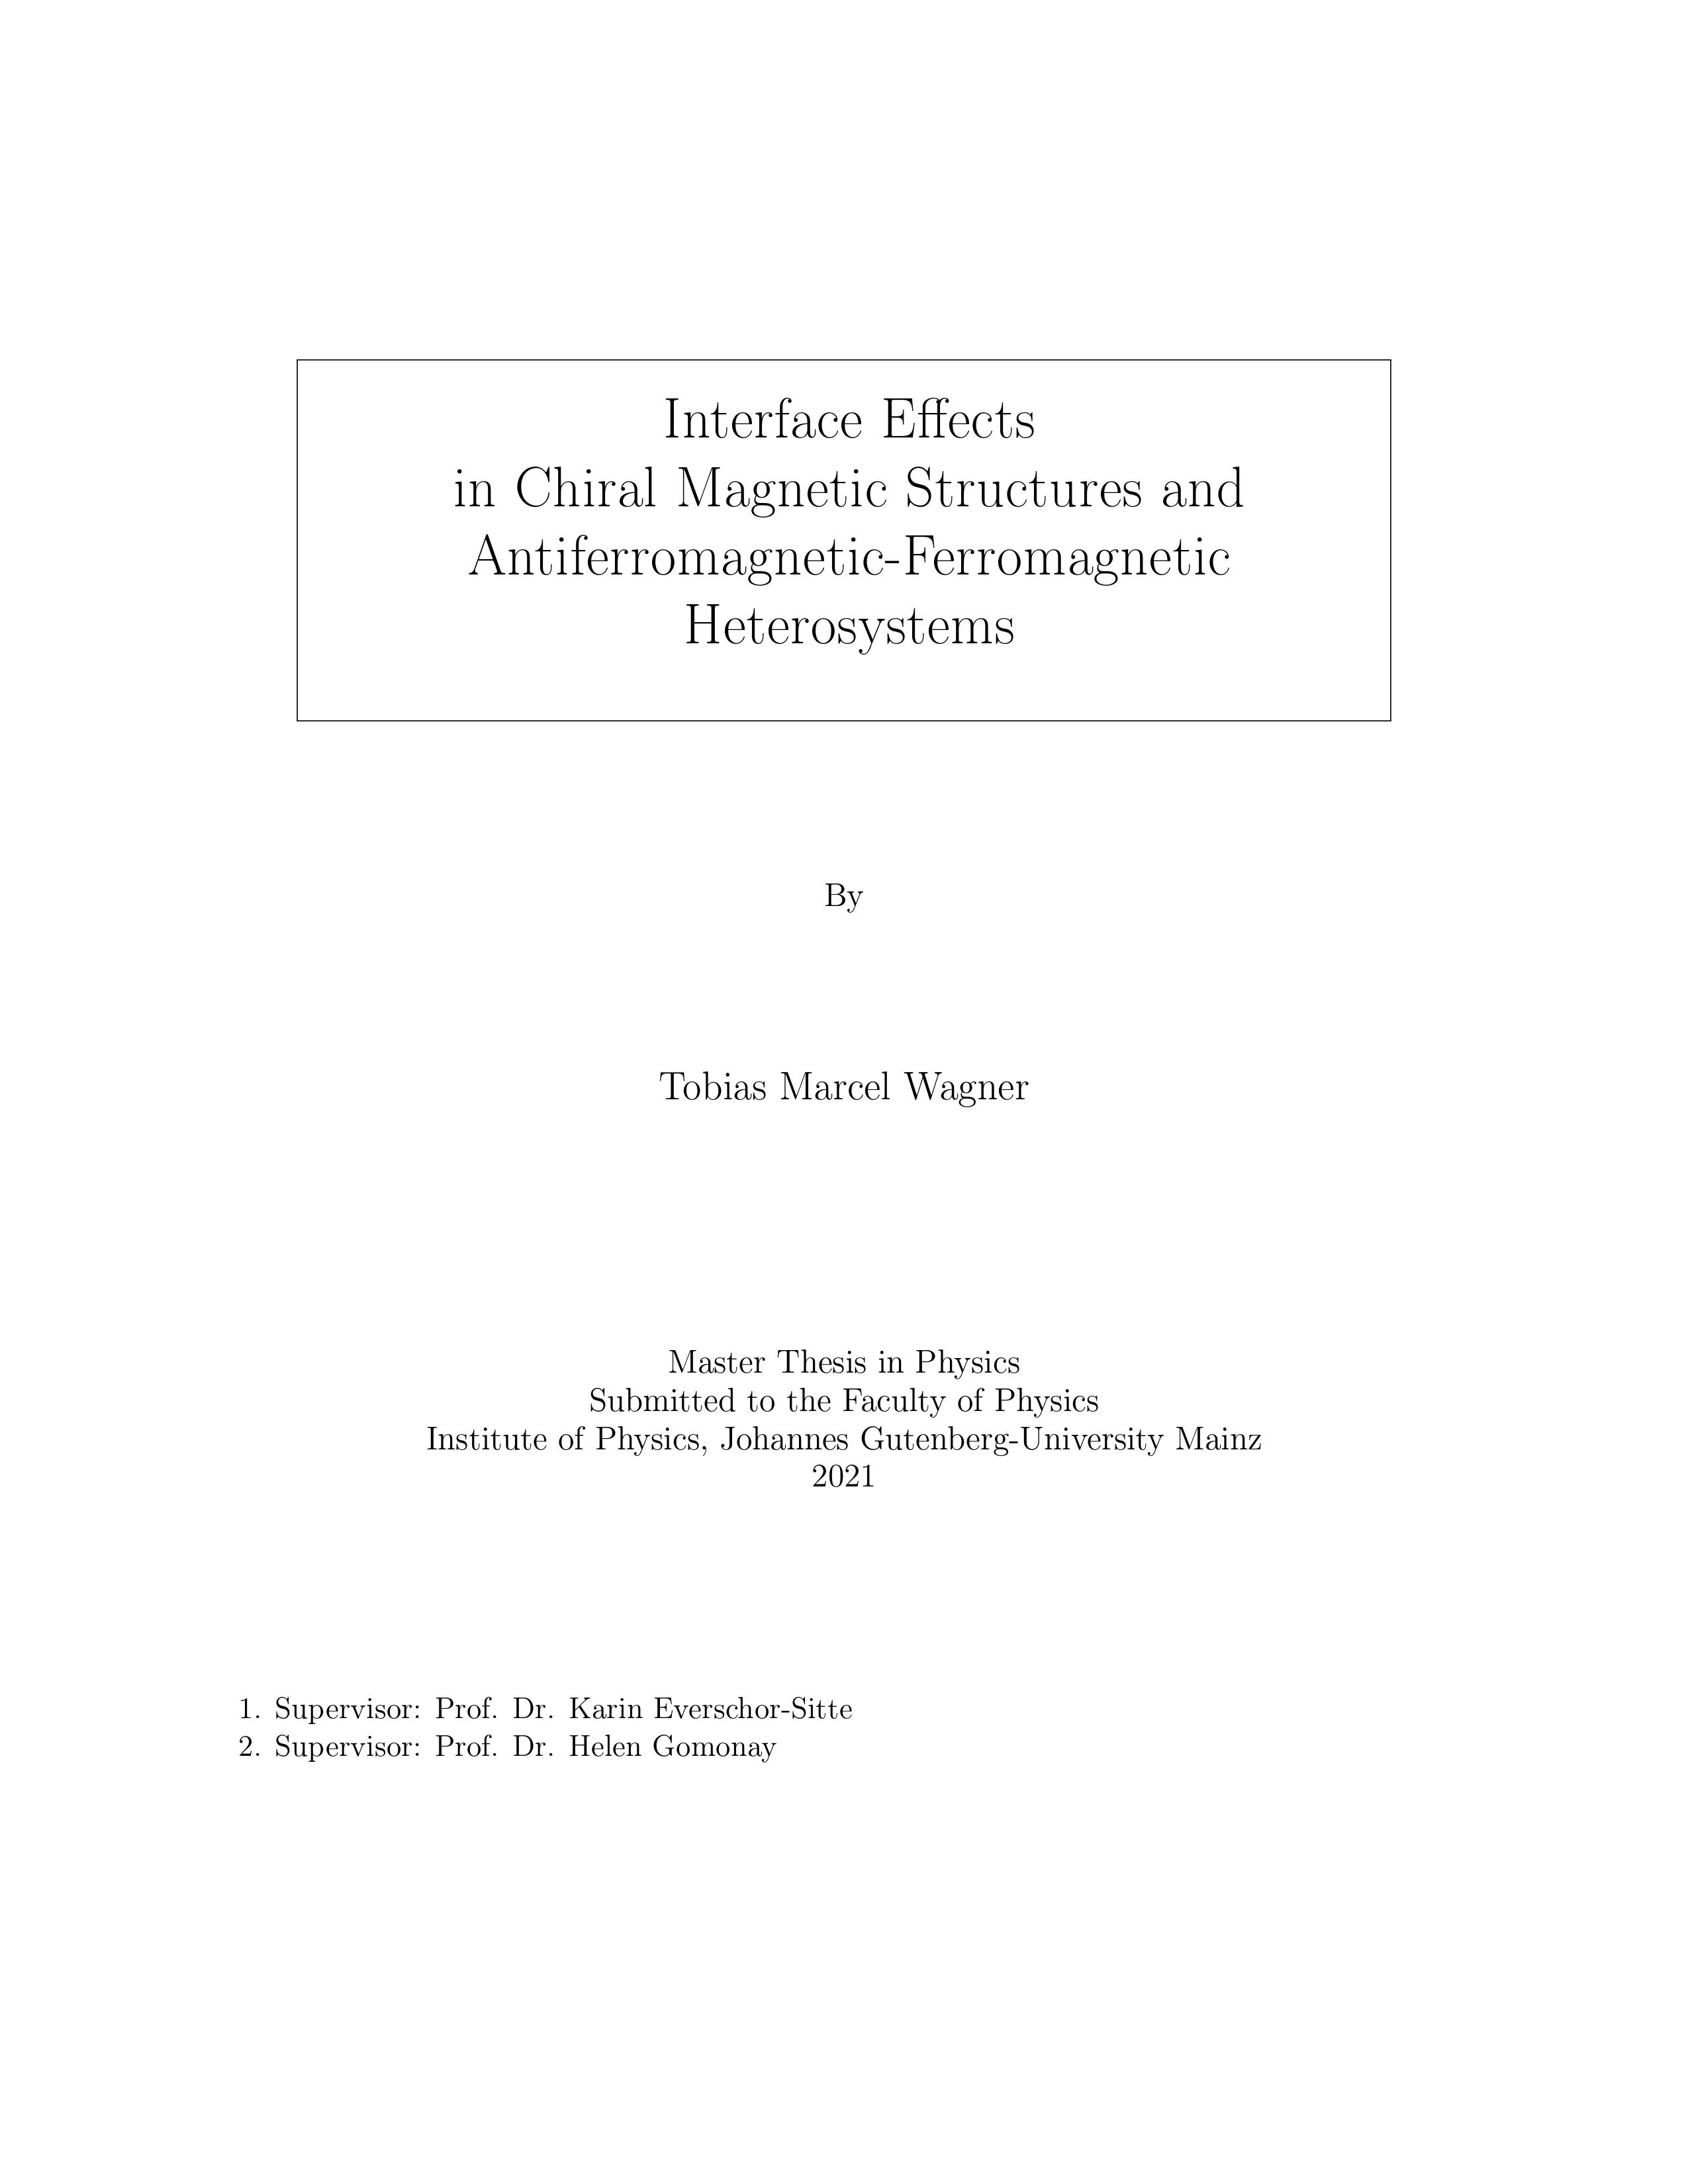 Master thesis Tobias Marcel Wagner